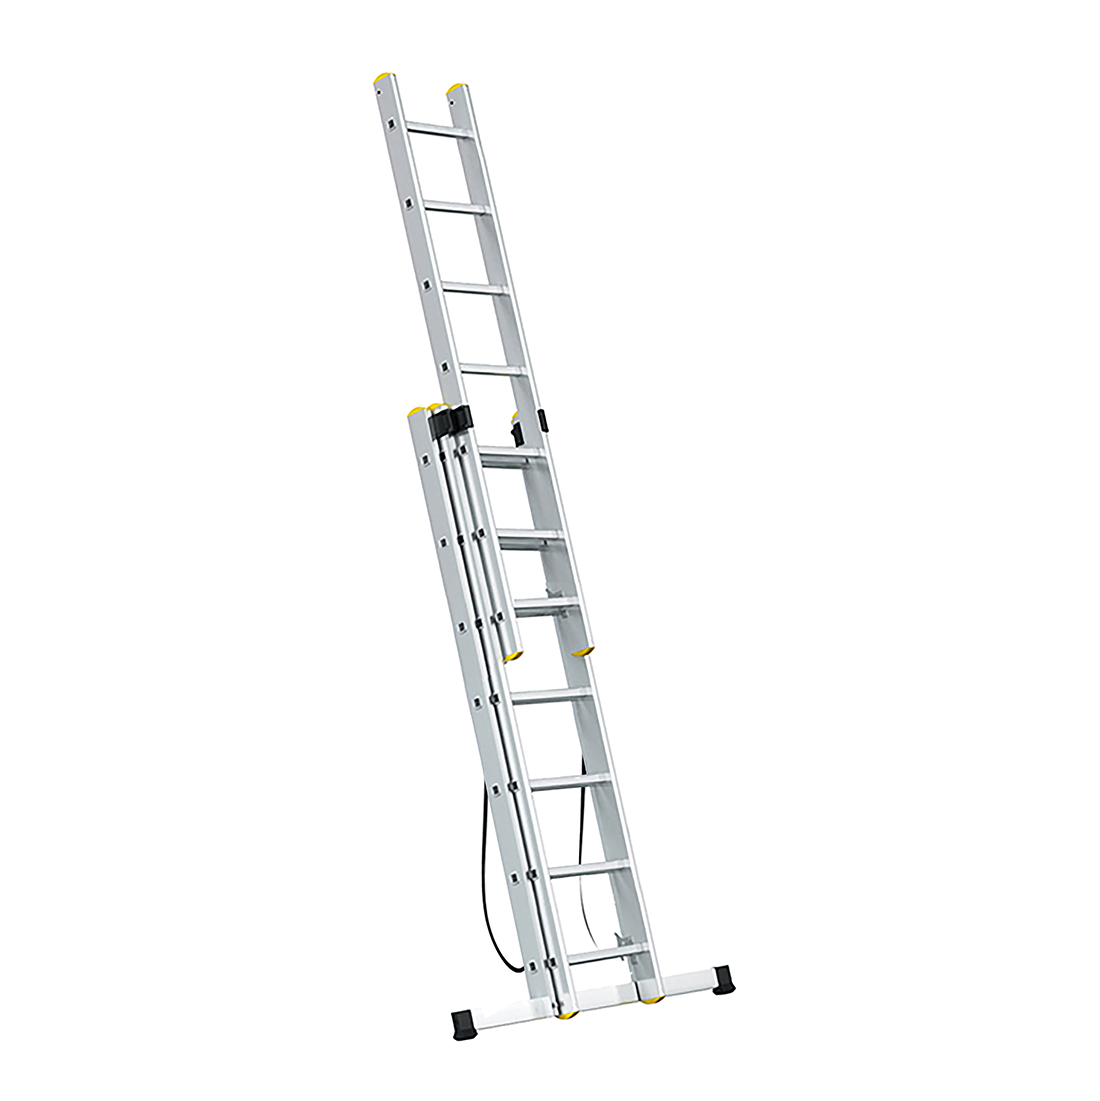 16.5 ft. Reach Flexi Pro Type IA Aluminum Combination 3-section Ladder - 330 lbs. Load Capacity